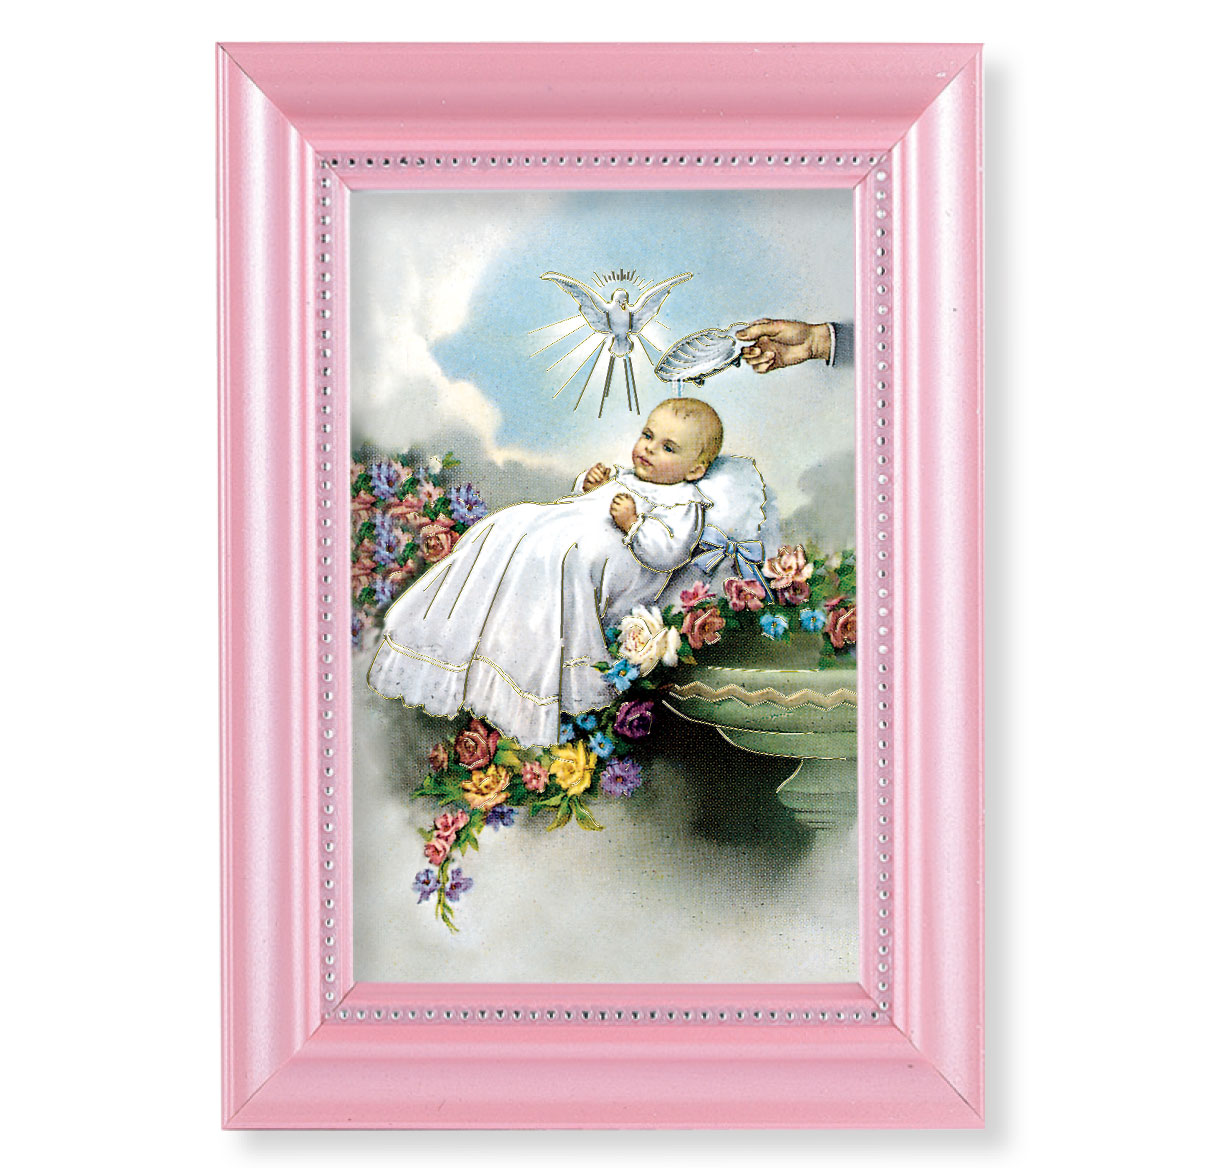 Print Baptism 4 x 6 inch Pearlized Pink Framed